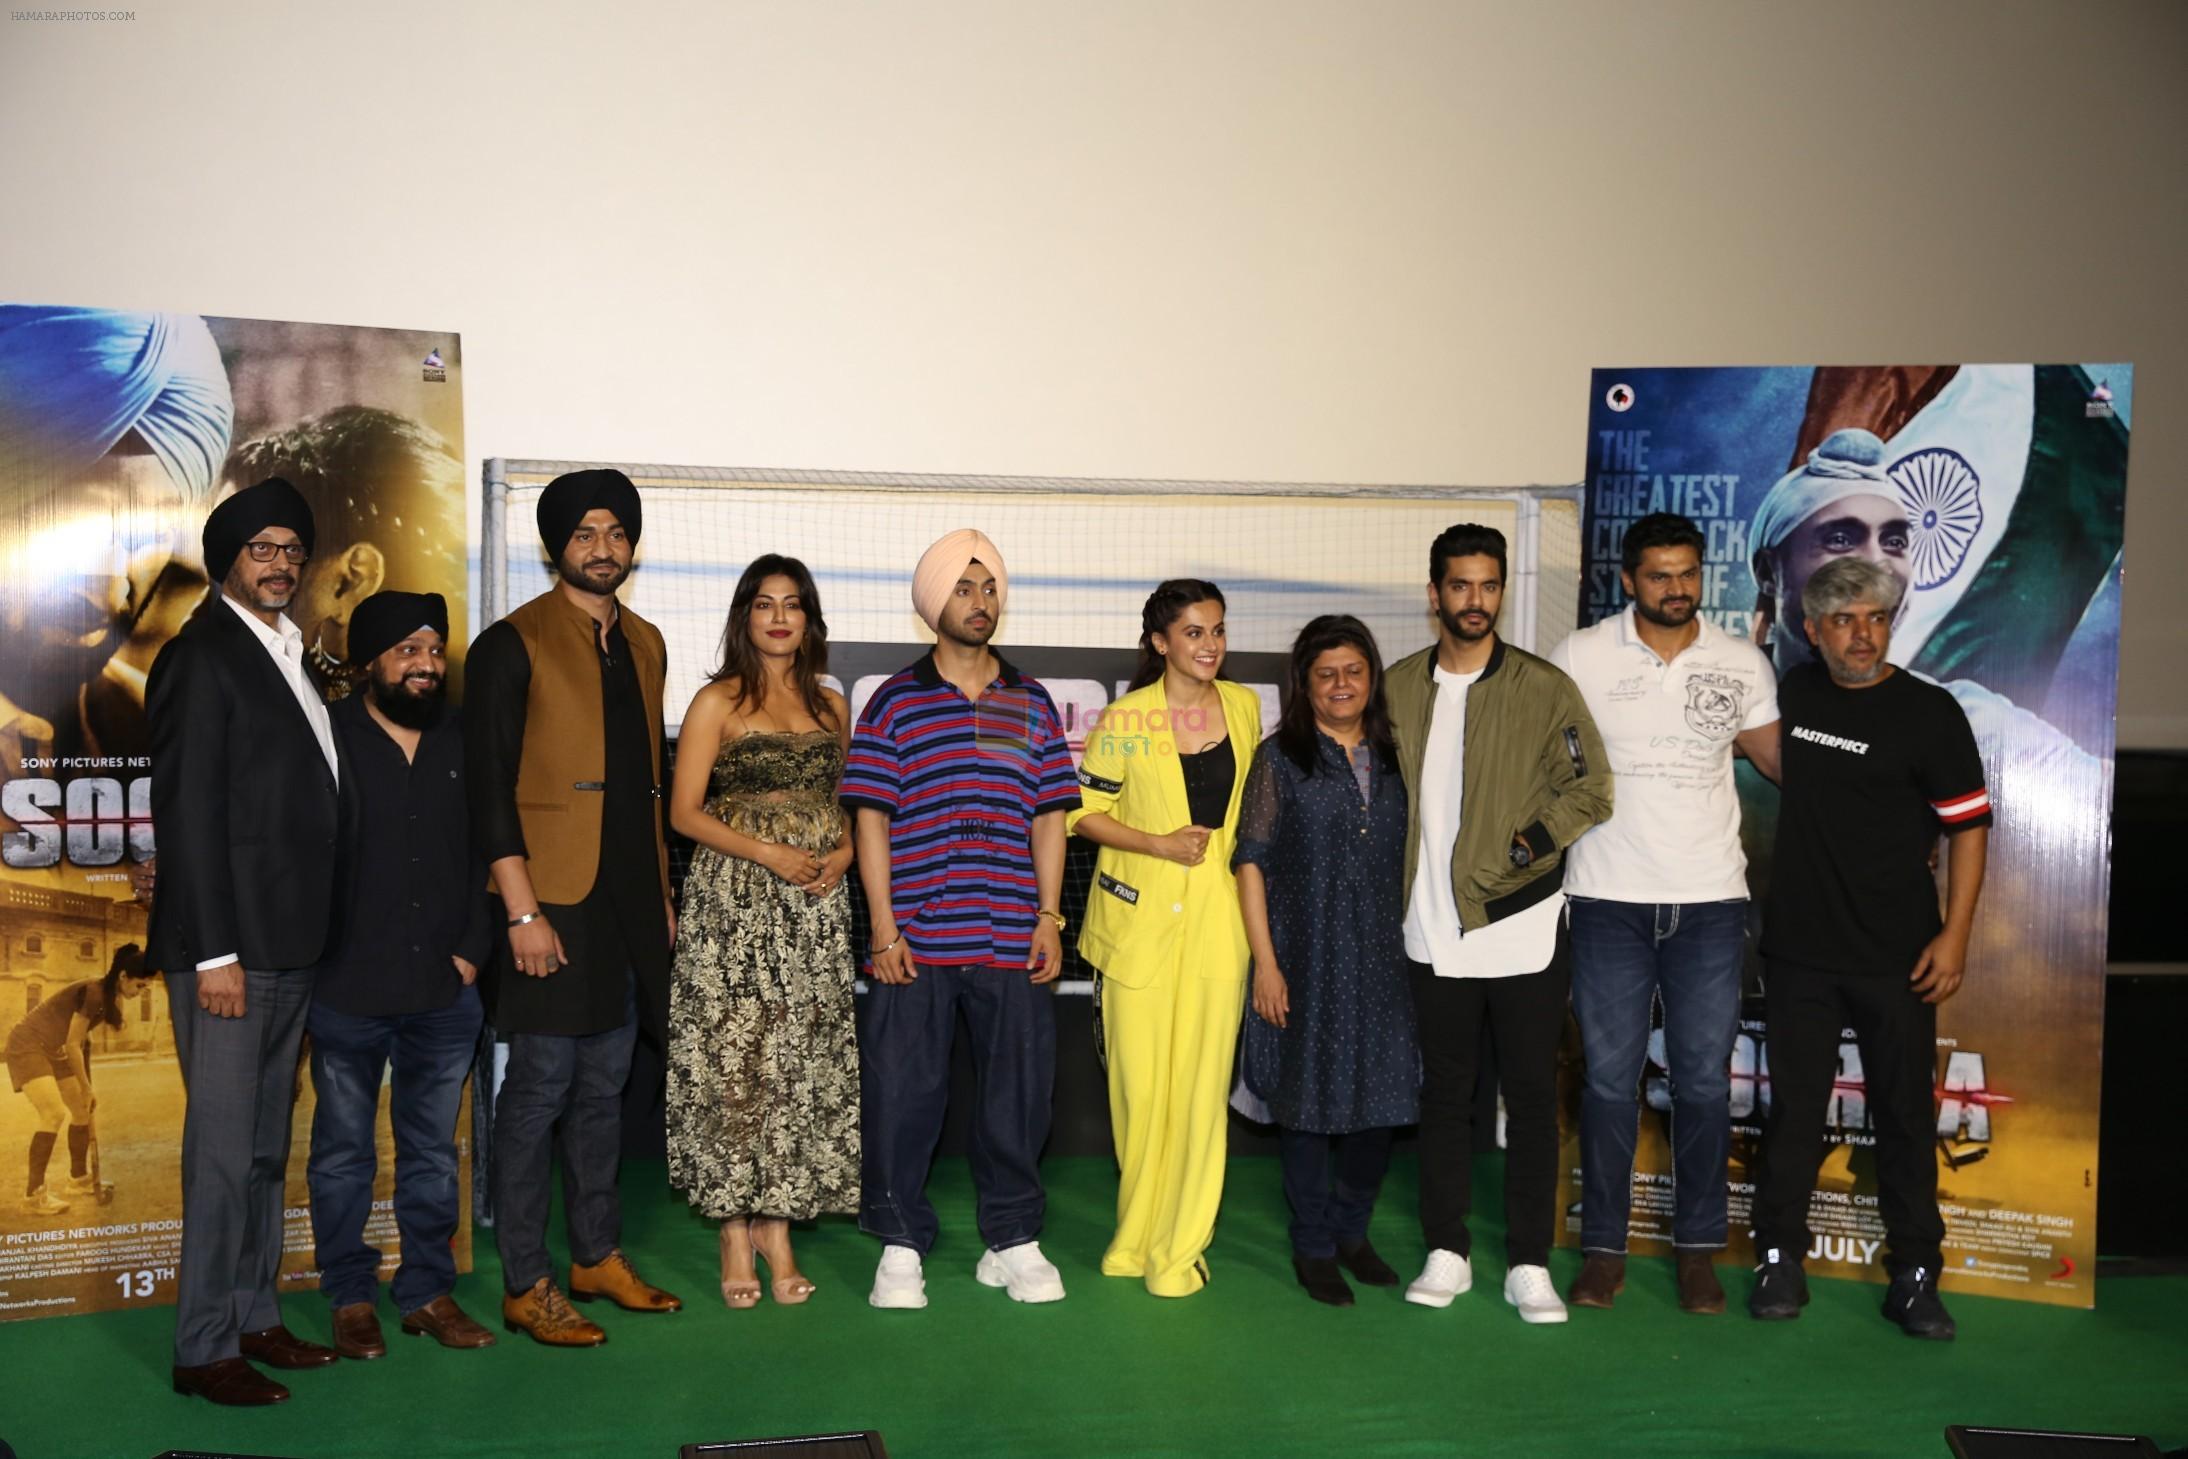 Diljit Dosanjh, Tapsee Pannu , Shaad Ali, Angad Bedi at the Trailer launch of film Soorma at pvr juhu in mumbai on 11th June 2018